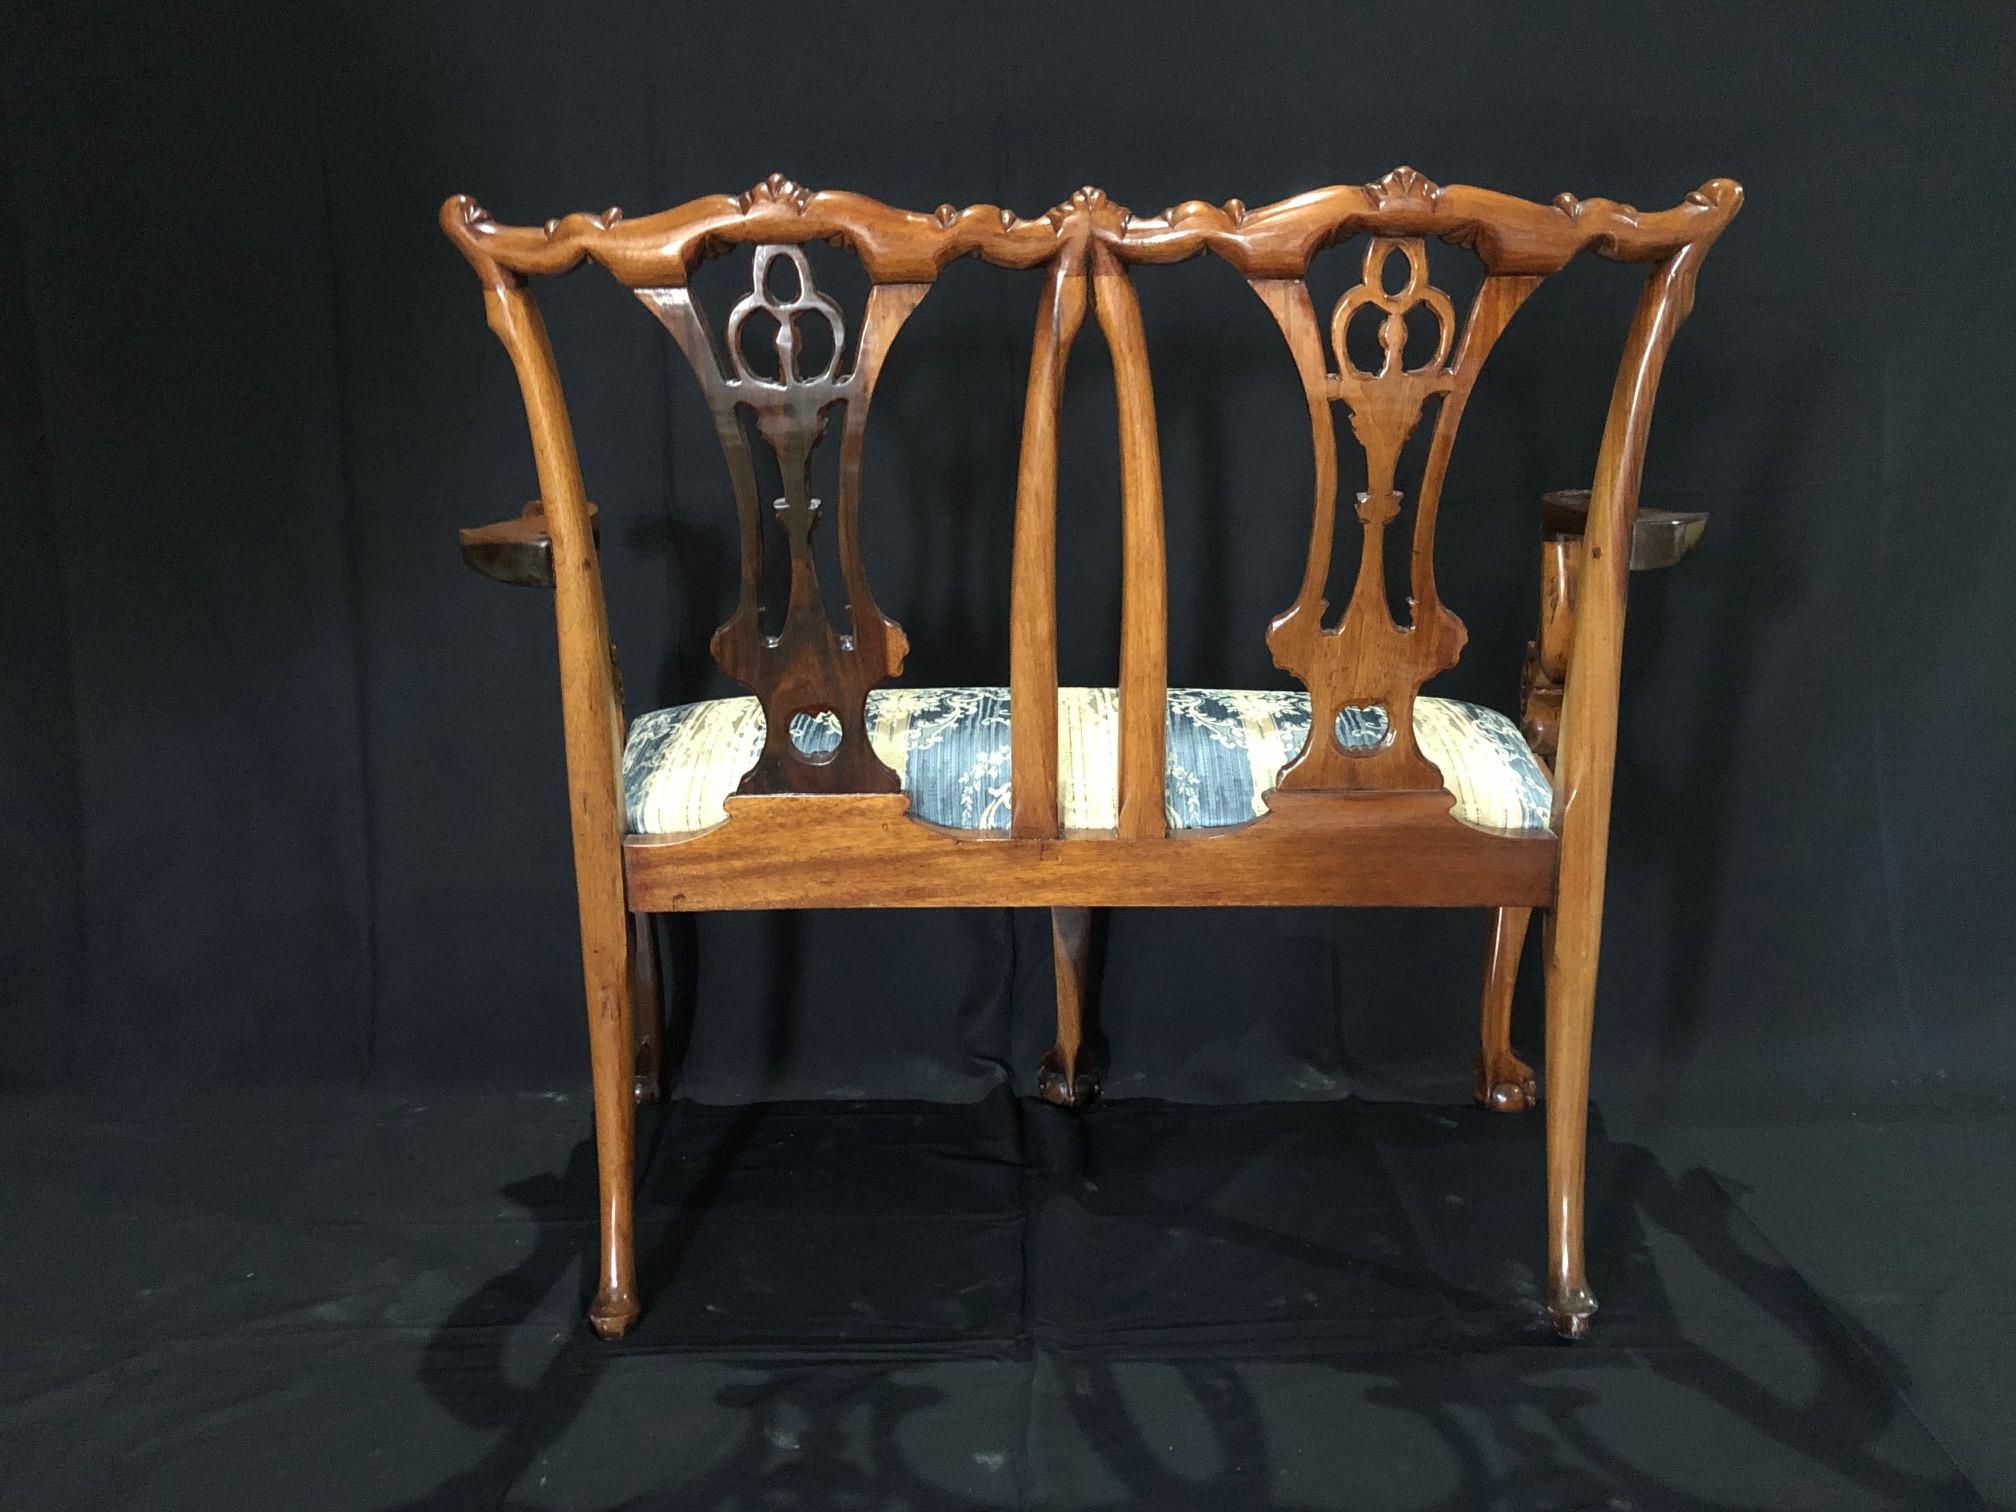 English Chippendale style antique mahogany loveseat with open carved double chair back having cream and blue striped upholstered seat supported on cabriole legs with ball and claw feet. Beautiful carving with sumptuous and immaculate upholstered